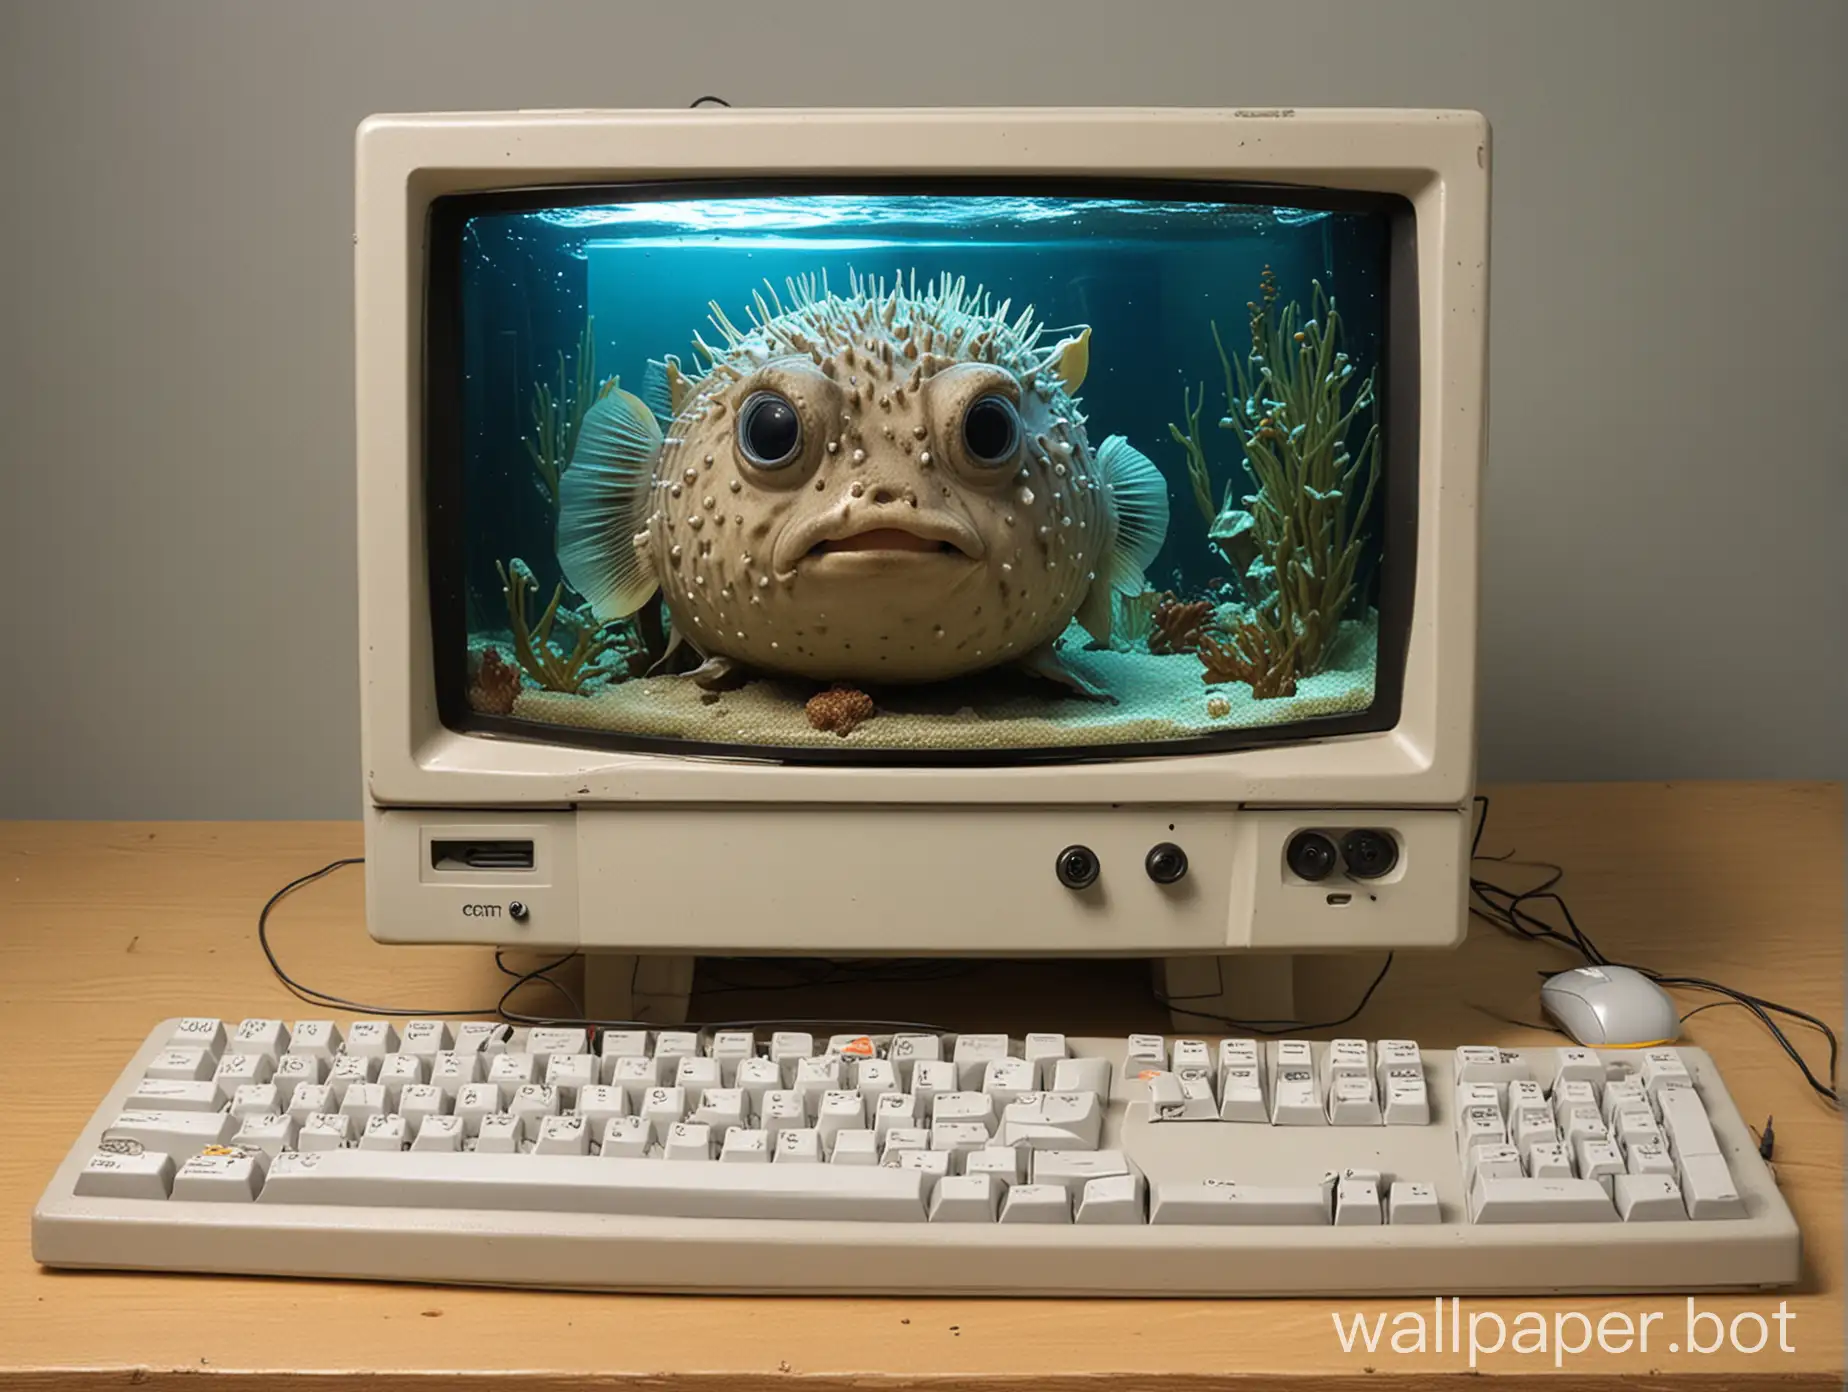 CRT monitor used as a fishbowl for a puffer fish is placed with keyboard and mouse.